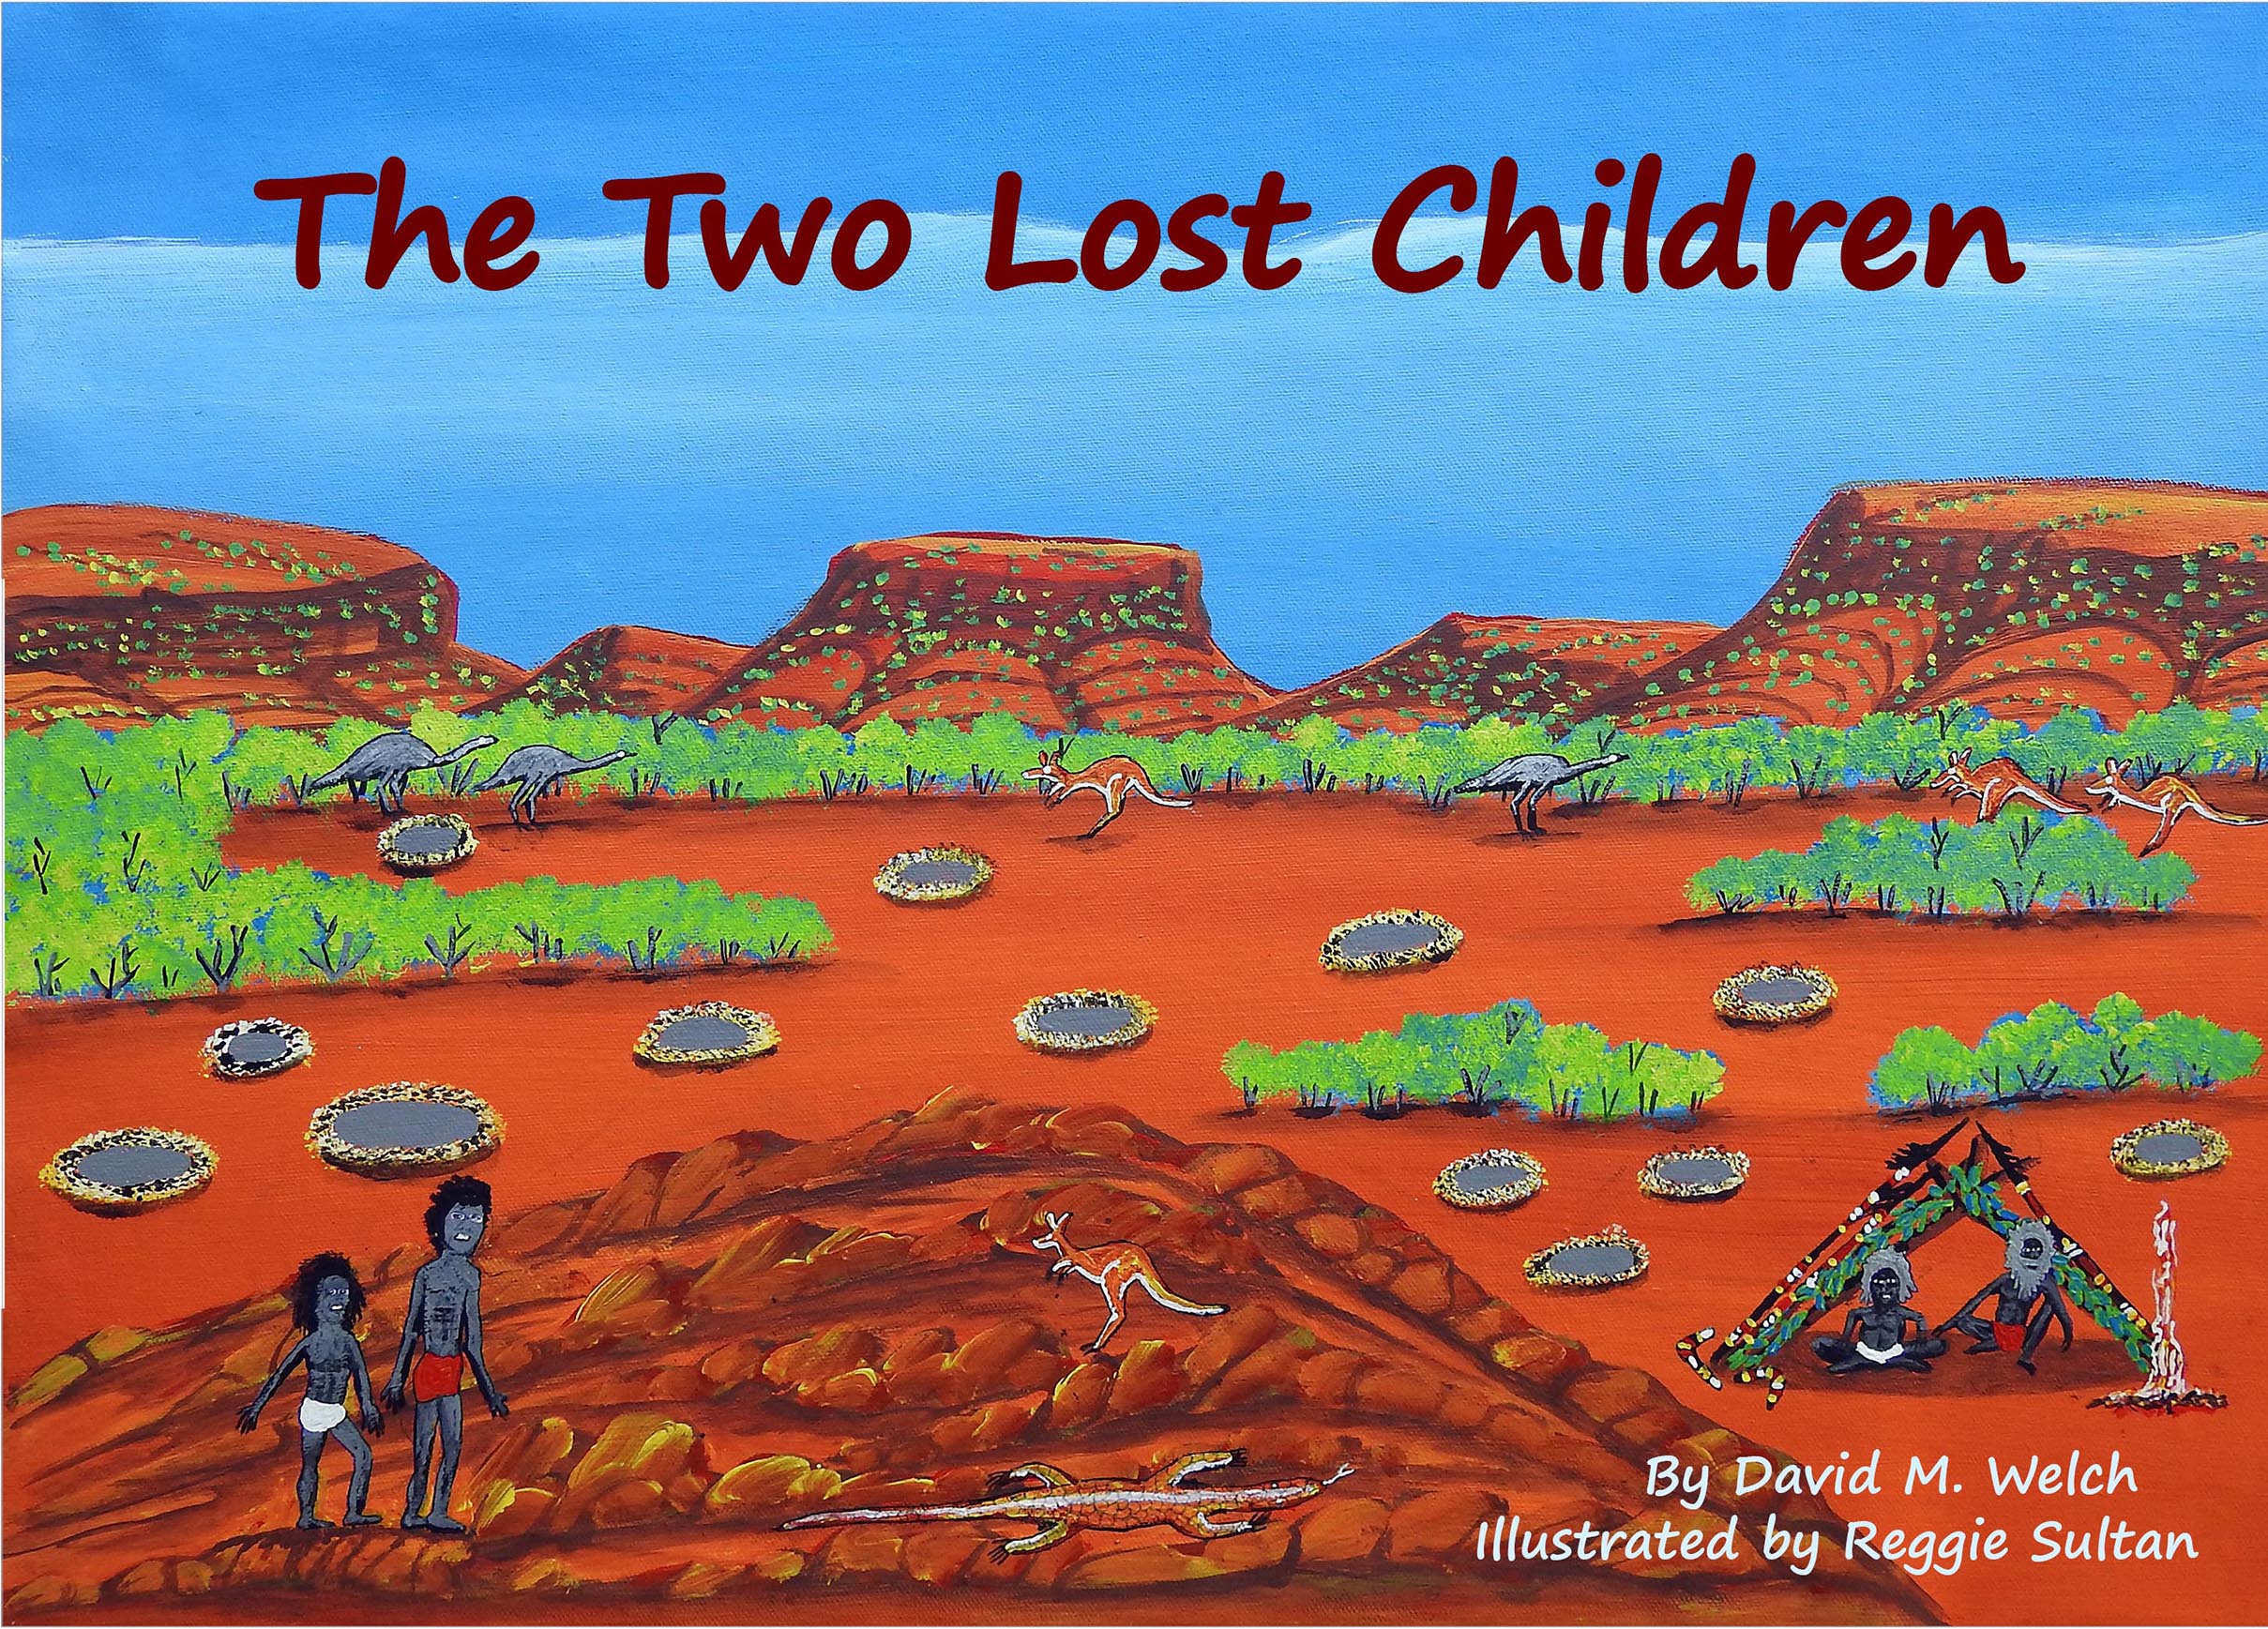 The two lost children by David Welch and illustrated by Reggie Sultan